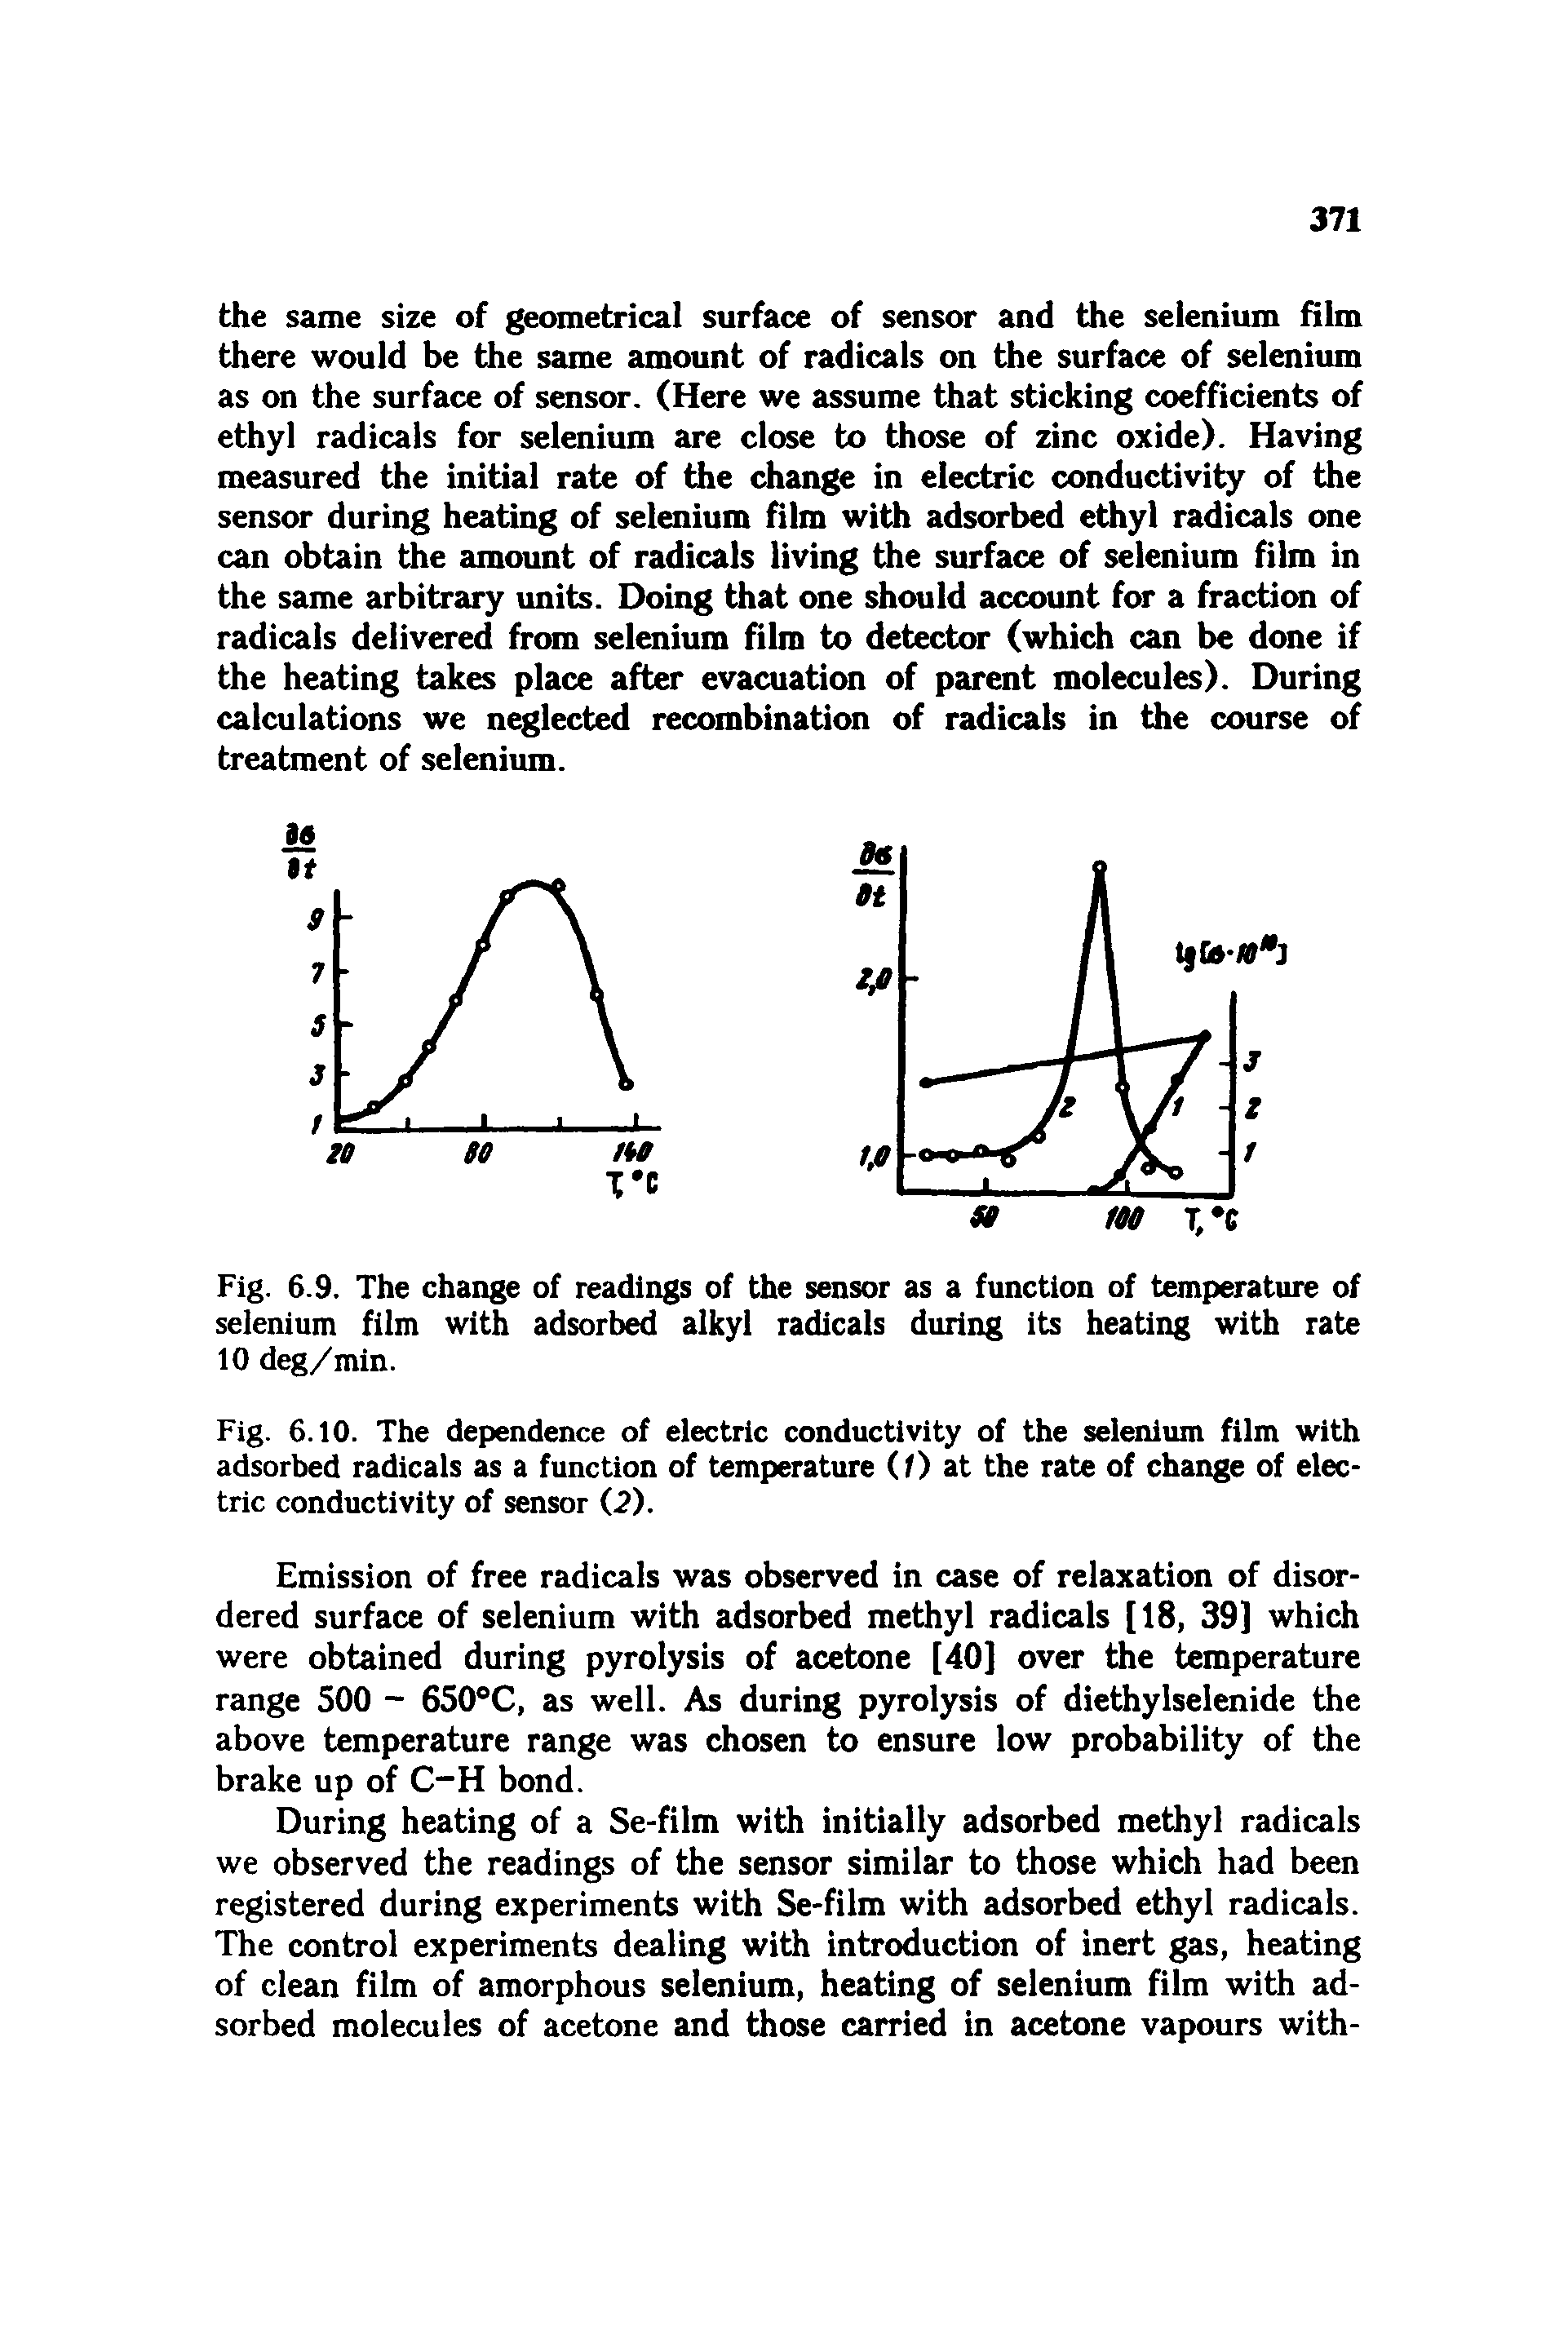 Fig. 6.10. The dependence of electric conductivity of the selenium film with adsorbed radicals as a function of temperature (/) at the rate of change of electric conductivity of sensor (2).